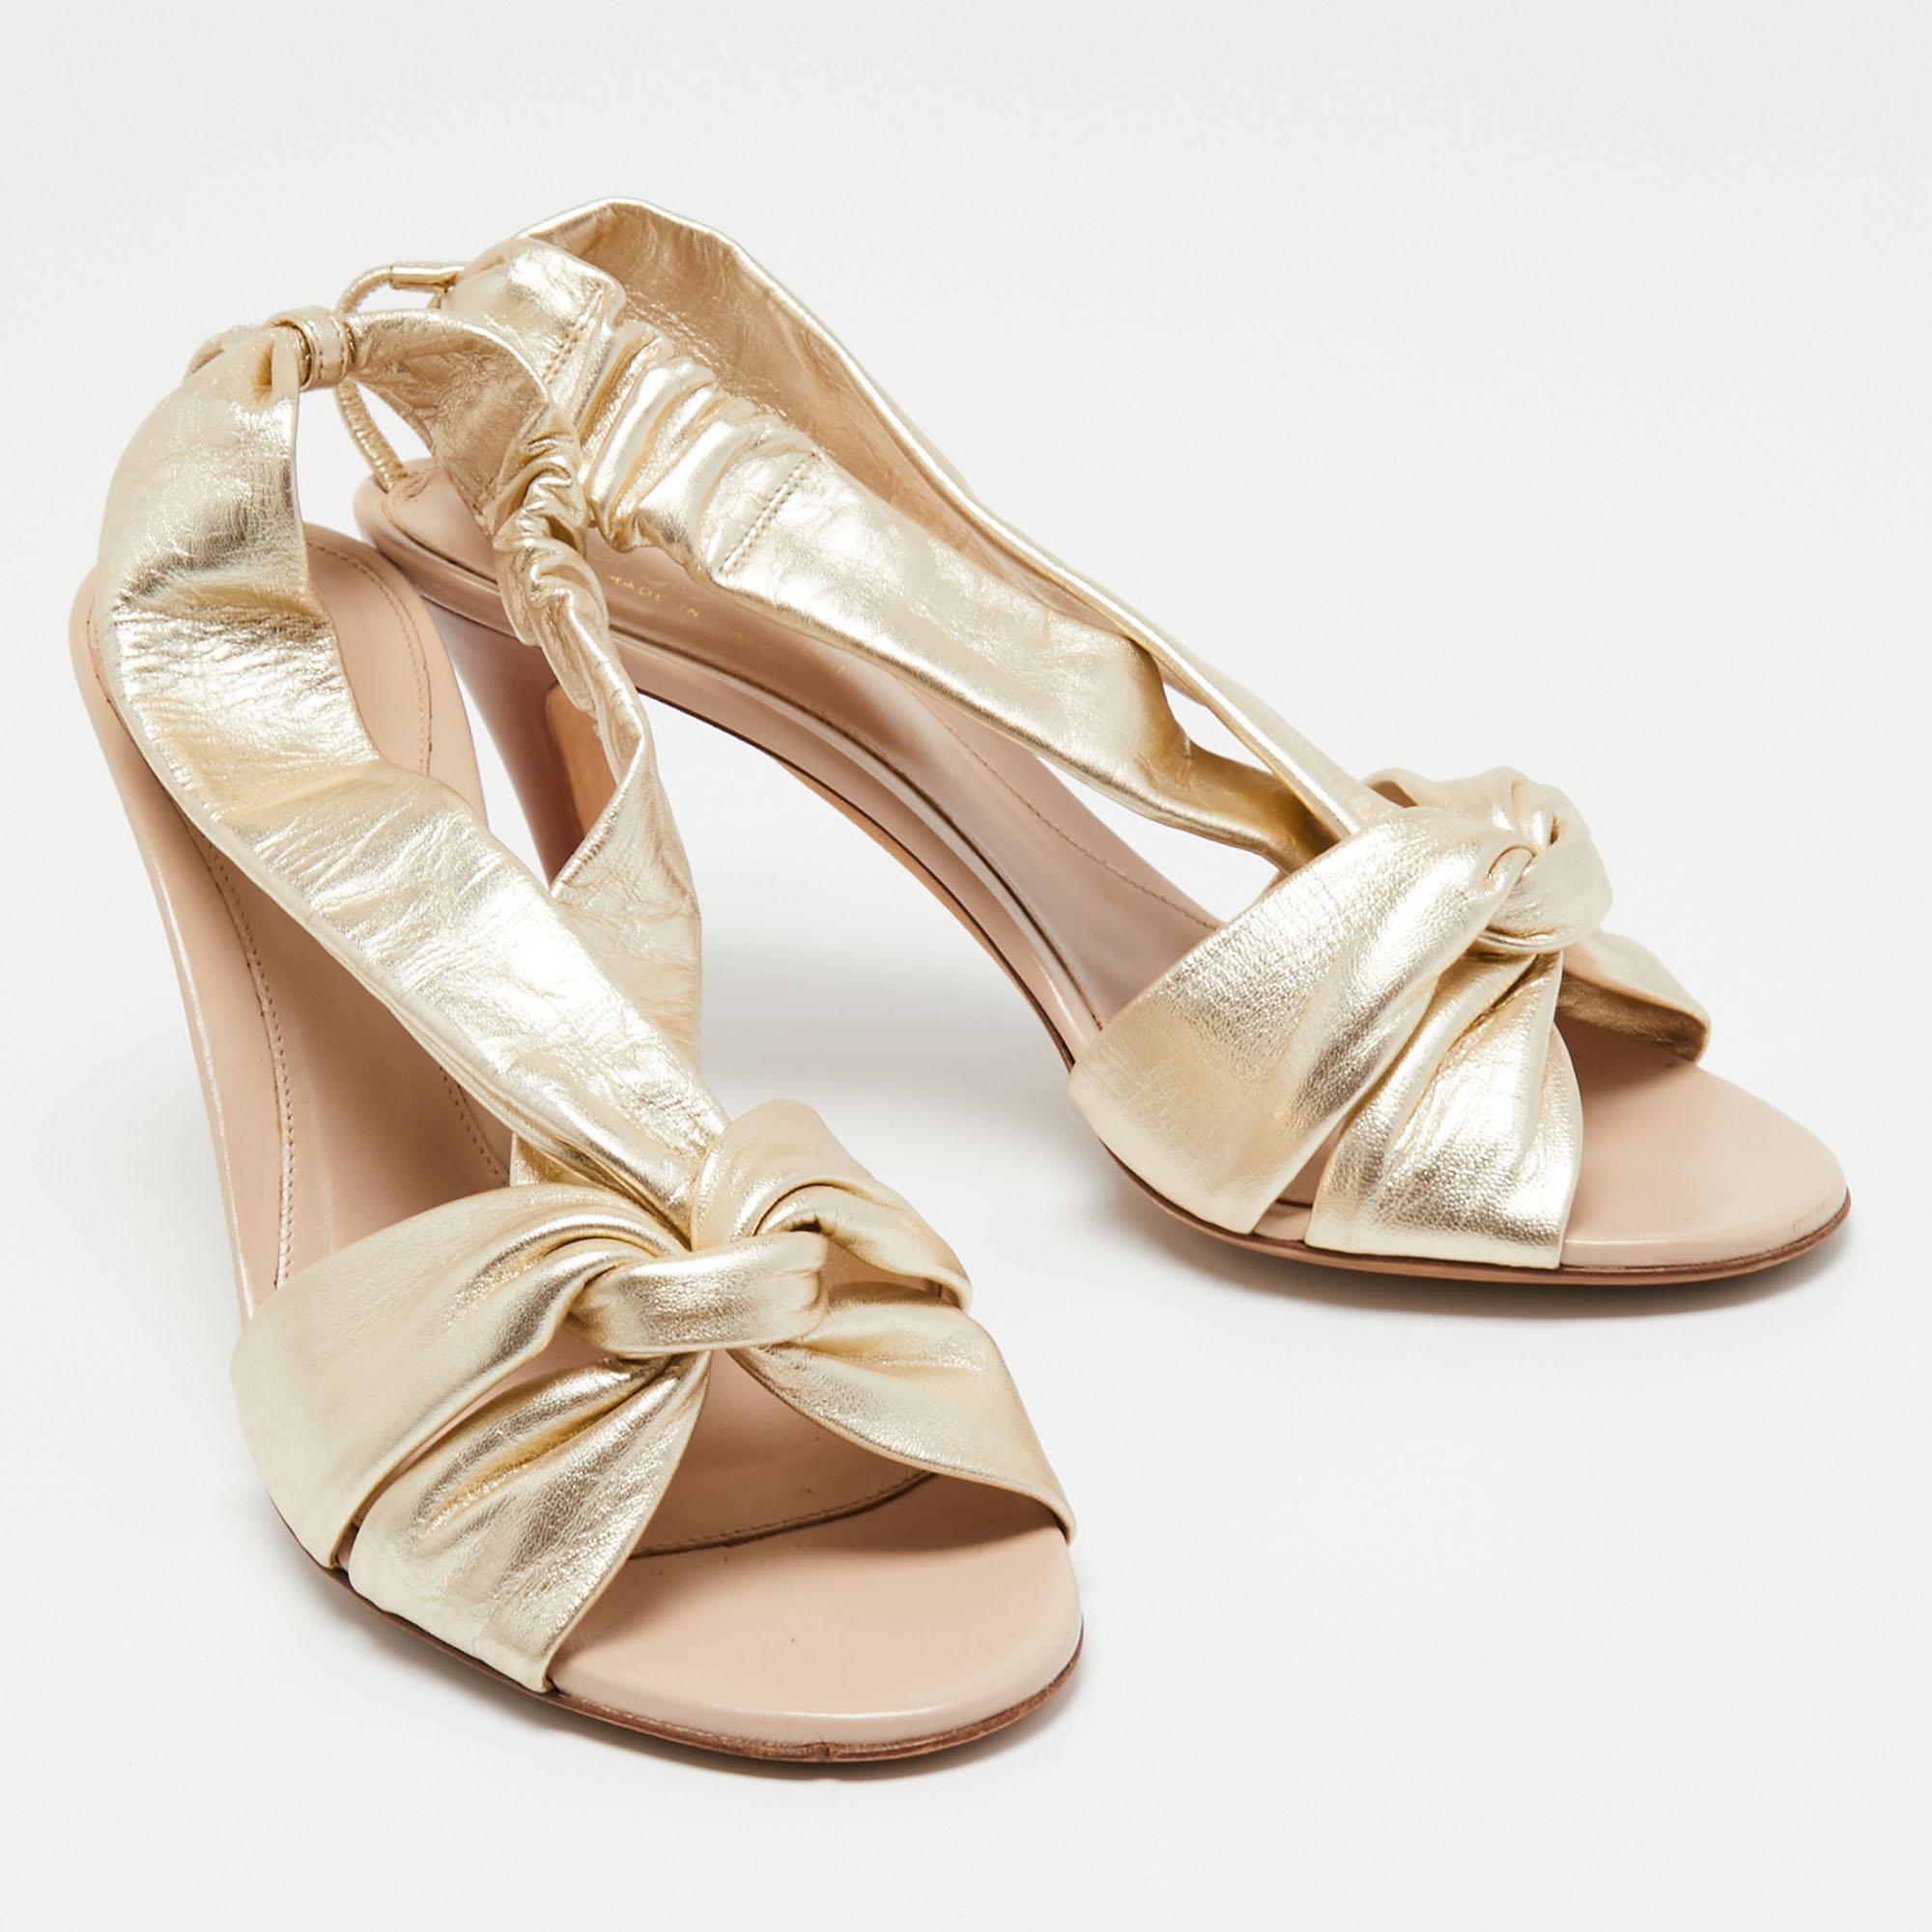 Sergio Rossi Gold Leather Knot Detail Open Toe Sandals Size  40